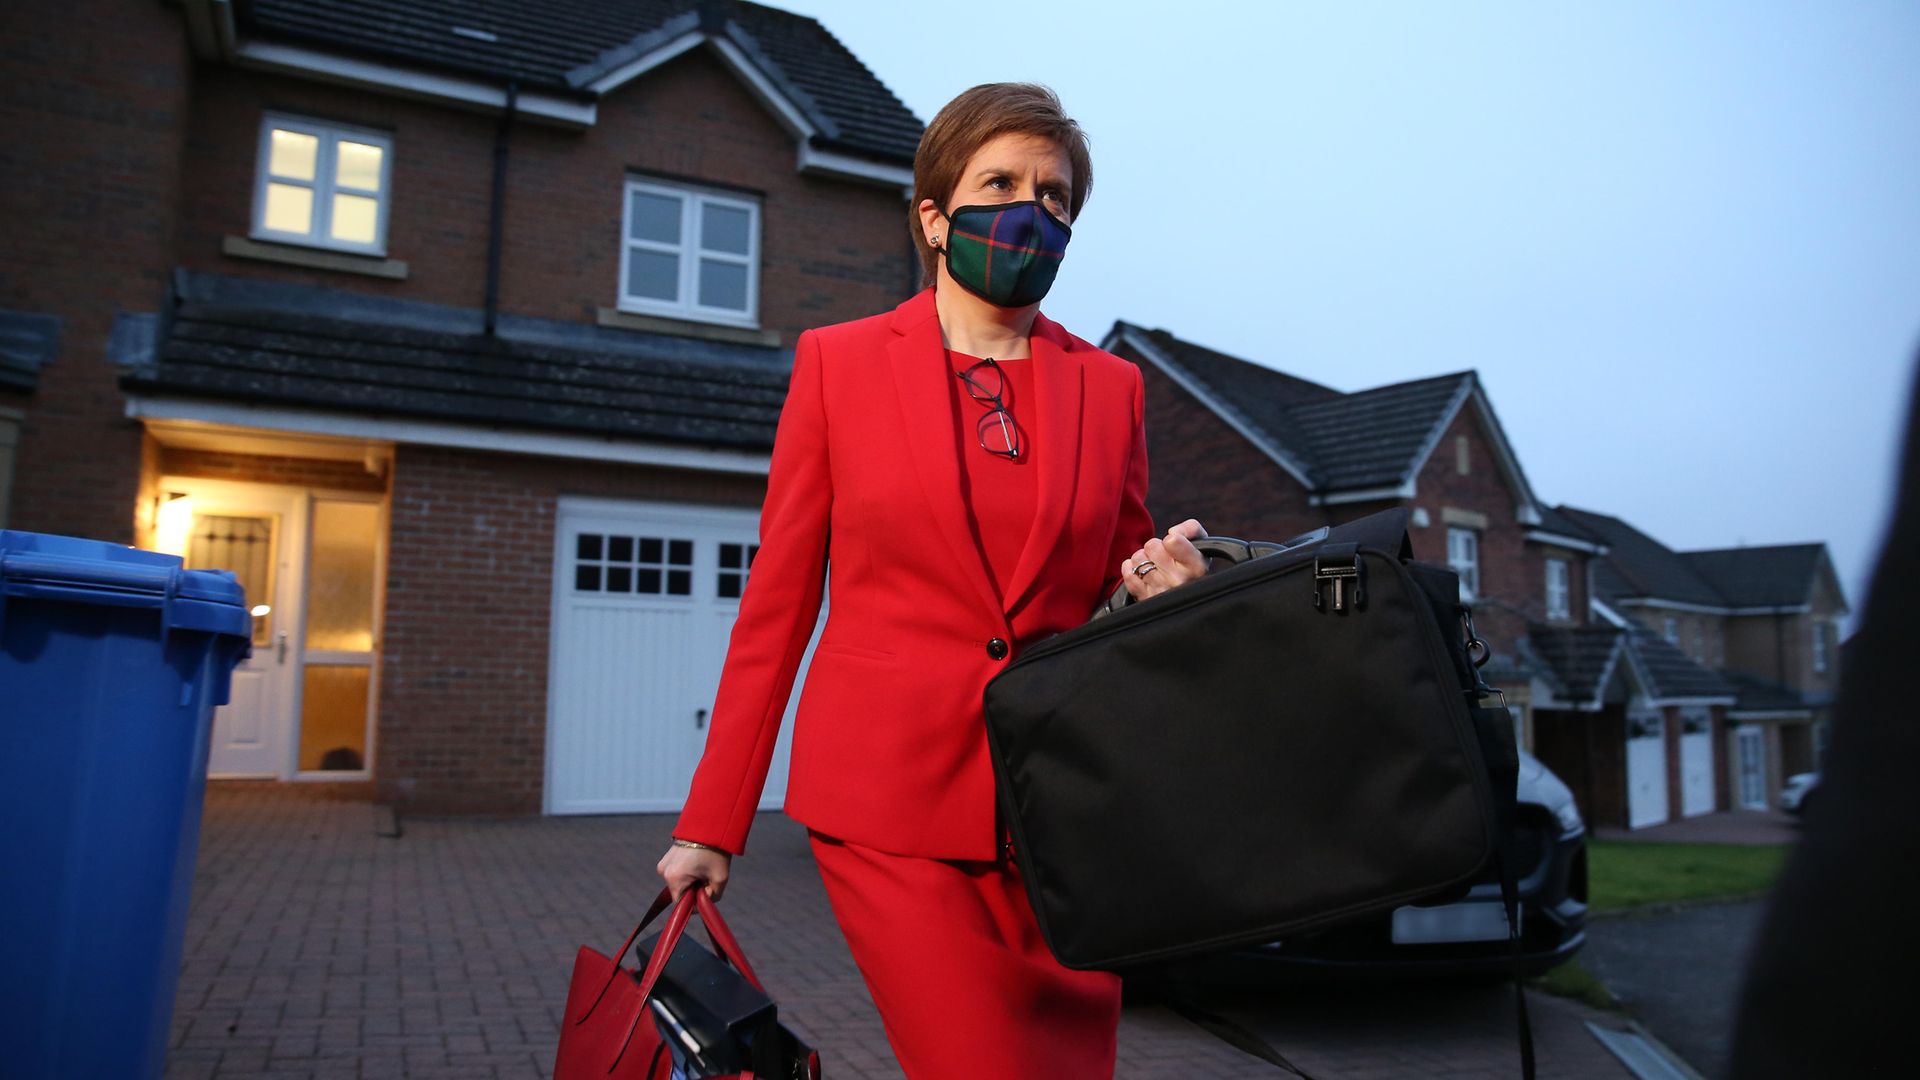 First minister of Scotland, Nicola Sturgeon, leaves her home in Glasgow to head to Holyrood in Edinburgh to give evidence to the Scottish parliament's inquiry into her government's unlawful investigation of the former first minister Alex Salmond - Credit: PA